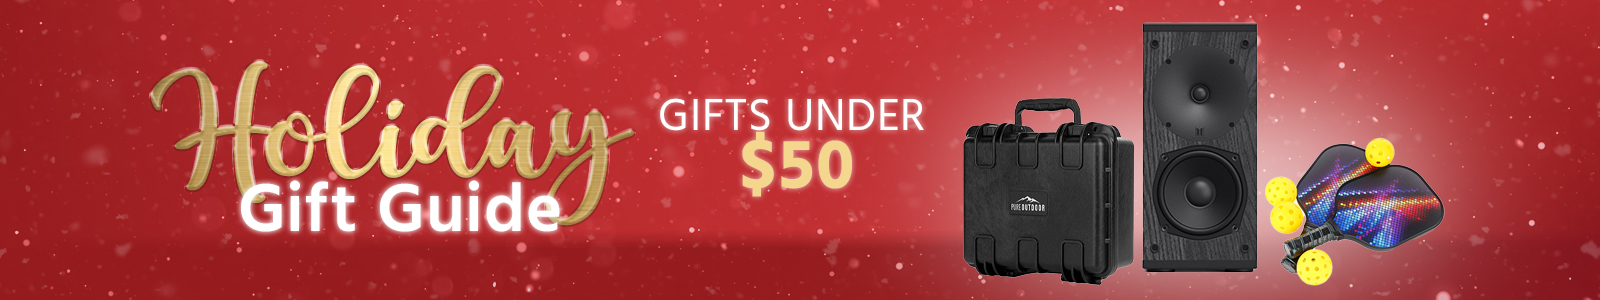 Let it Snow Savings!
HOLIDAY GIFT GUIDE
Up to 85% OFF
Shop Now